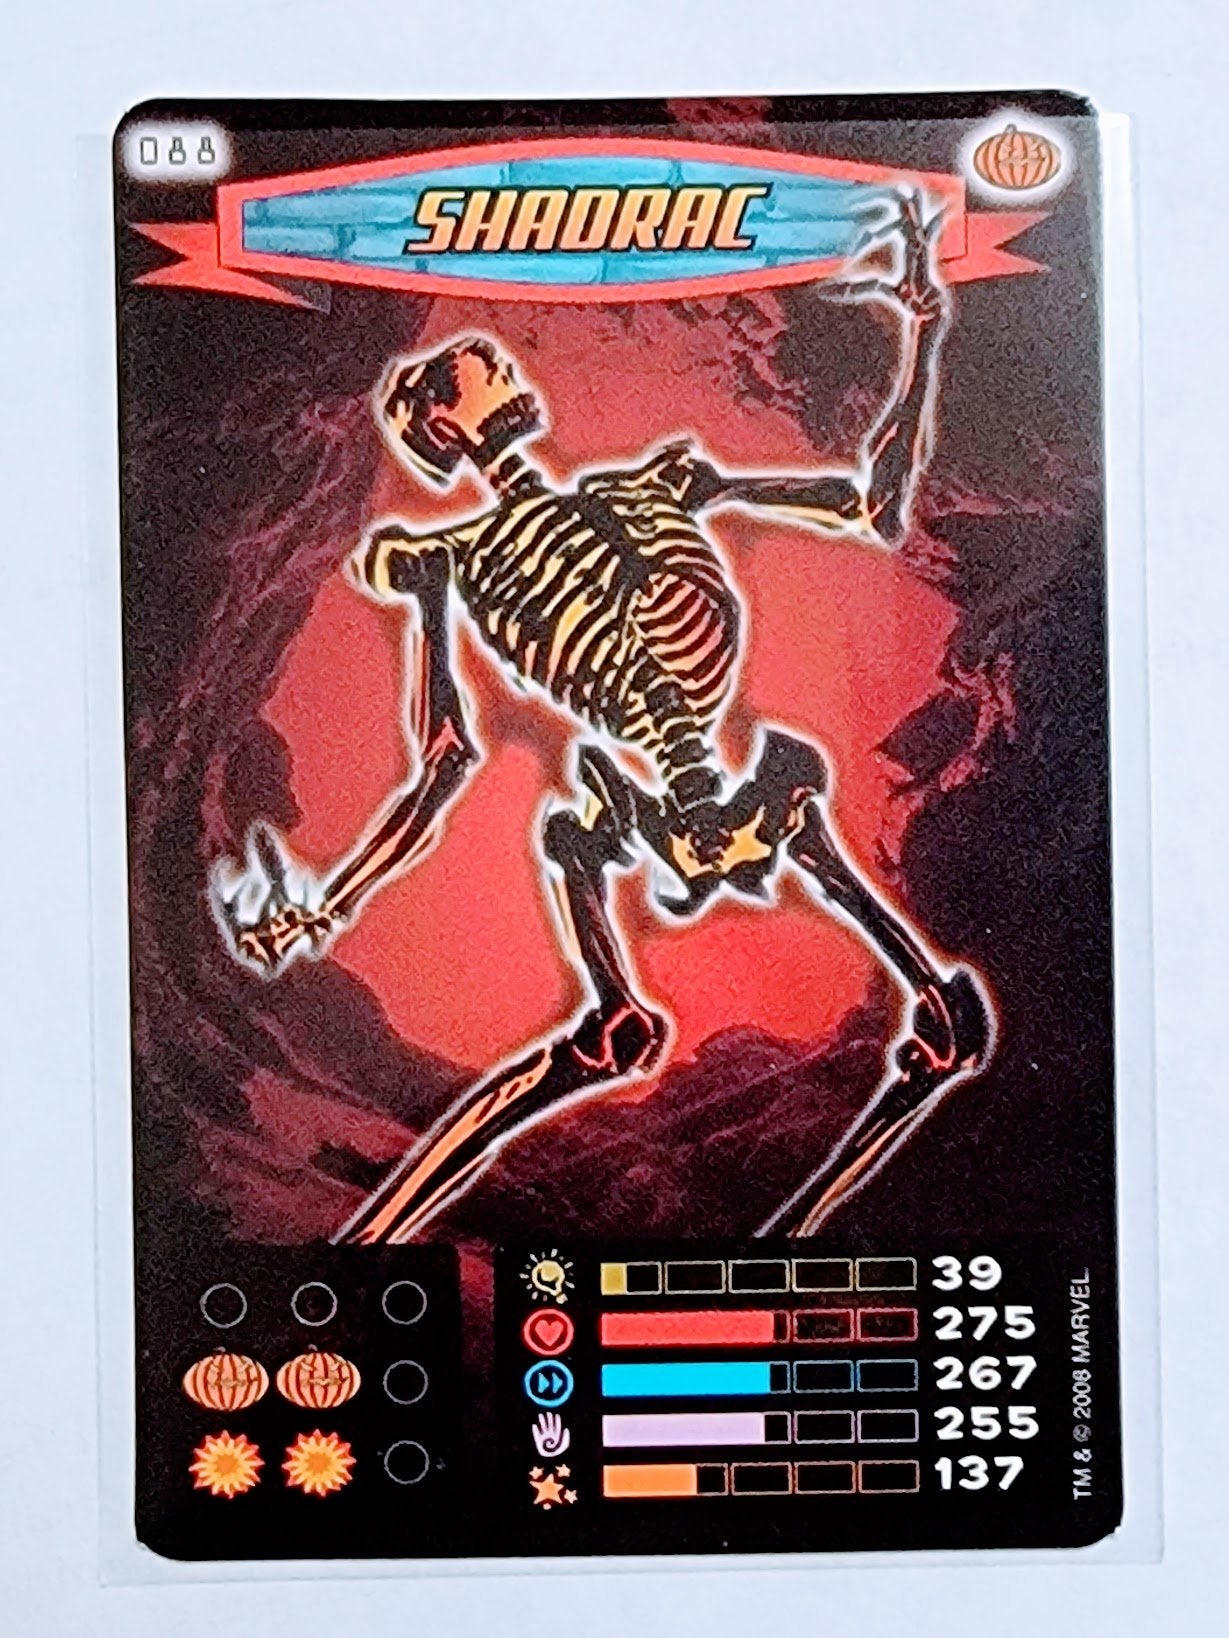 2008 Spiderman Heroes and Villains Shadrac #88 Marvel Booster Trading Card UPTI simple Xclusive Collectibles   